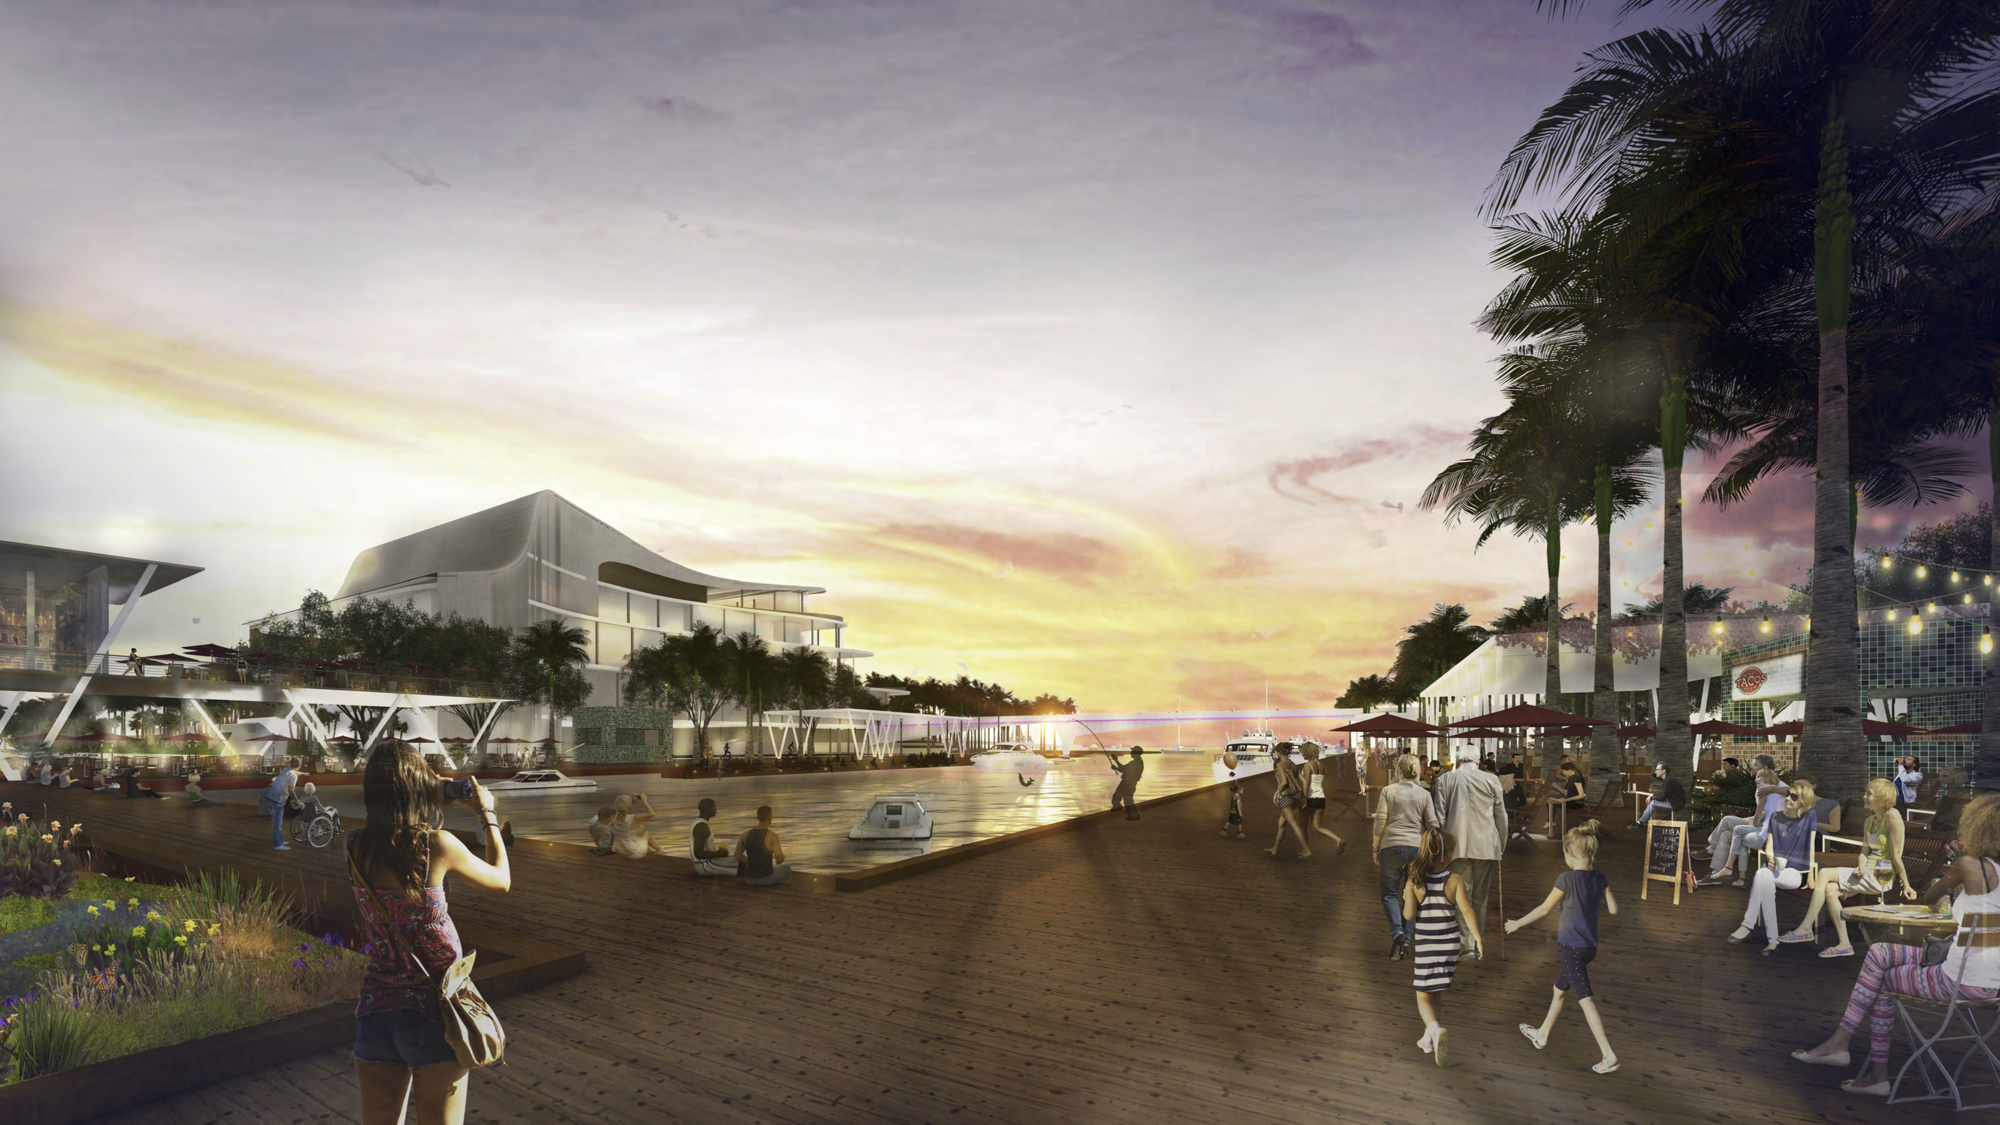 The canal district would include bay views and short-term spaces for boaters to dock and dine.